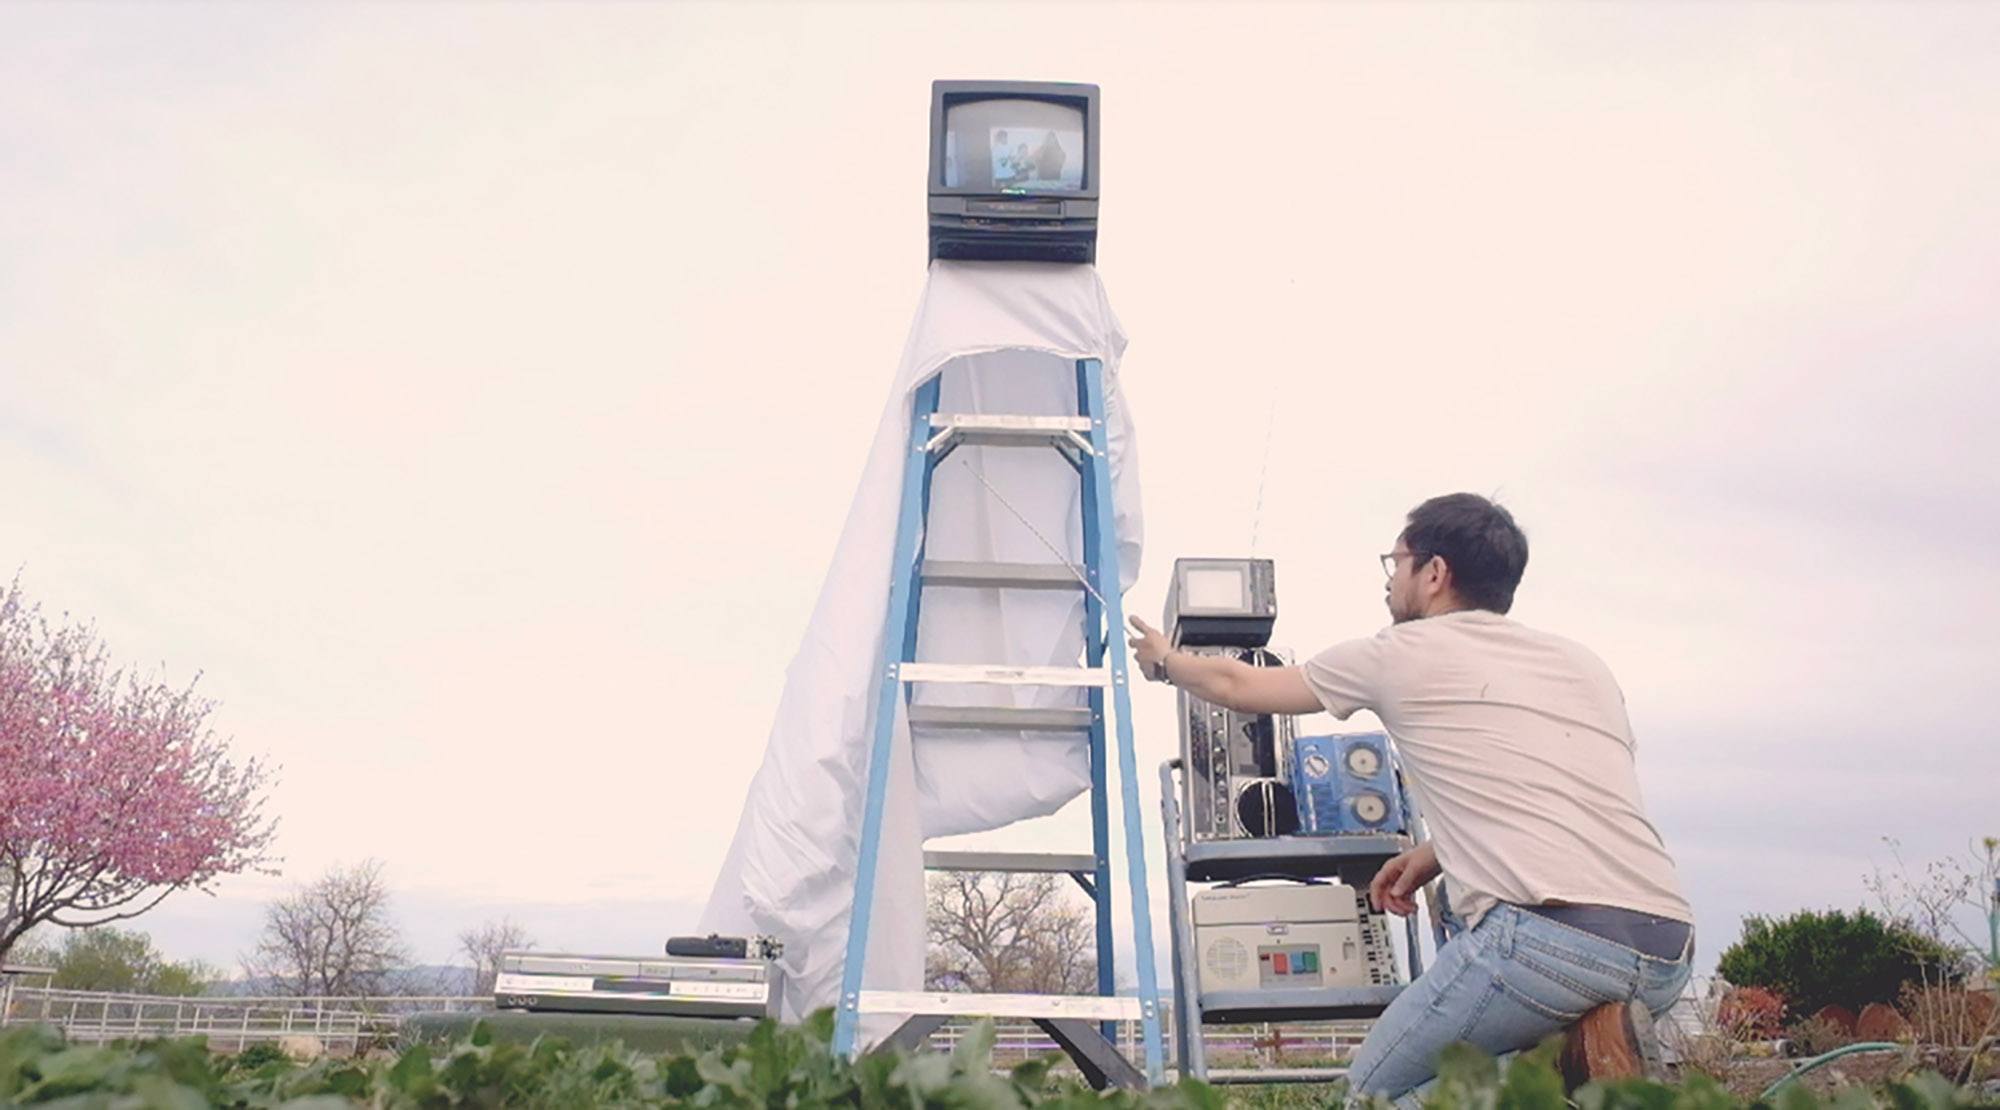 A man controls a small television on top of a ladder